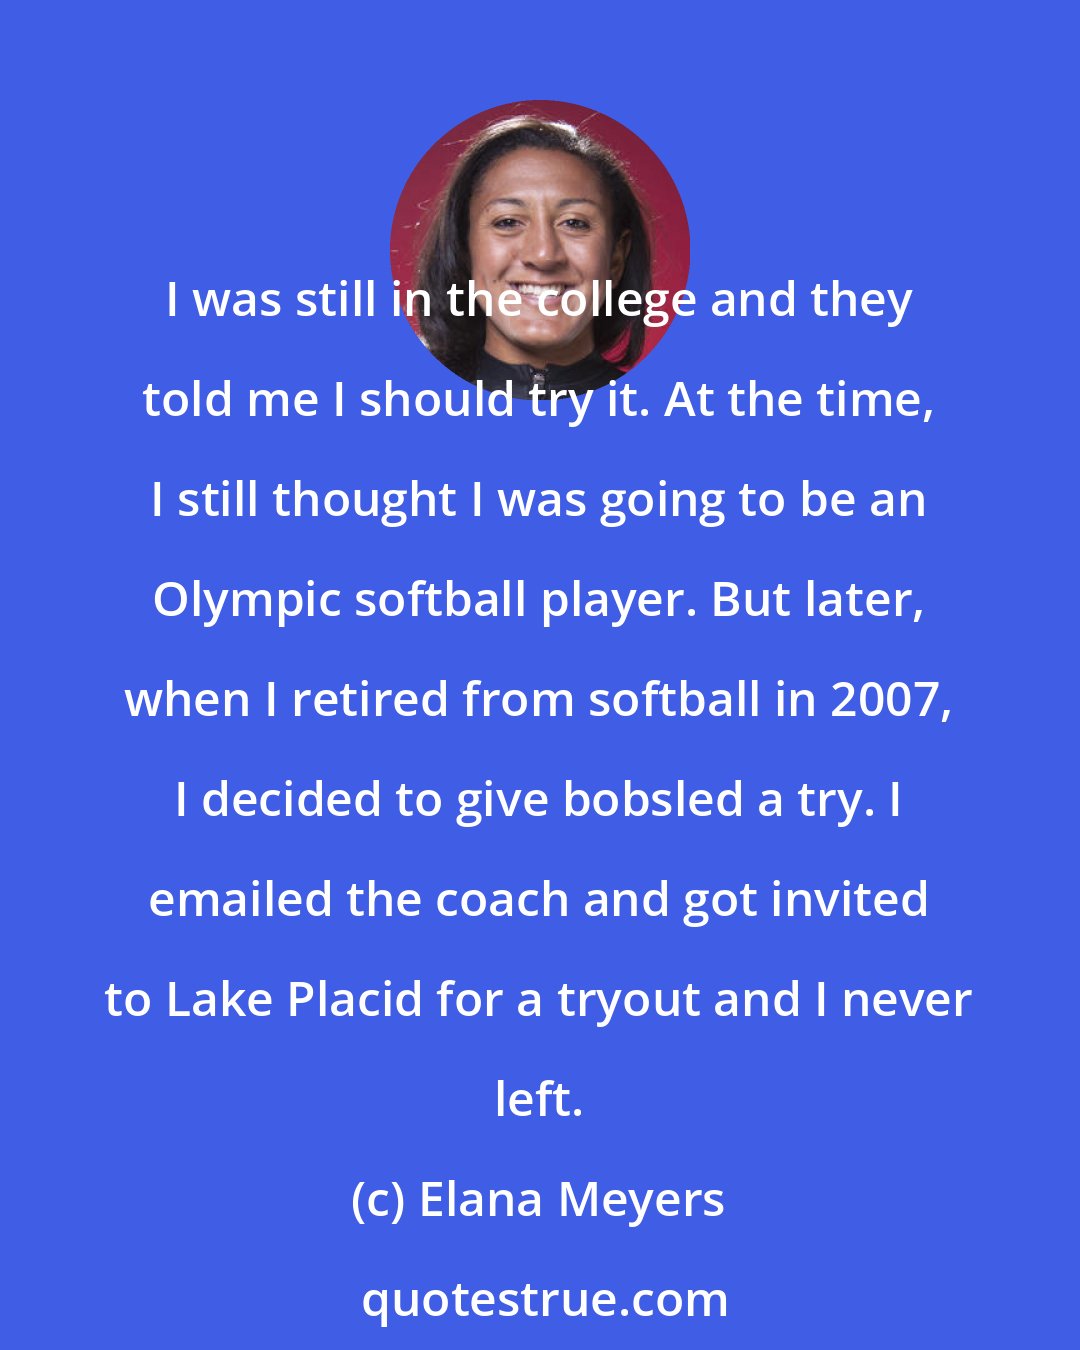 Elana Meyers: I was still in the college and they told me I should try it. At the time, I still thought I was going to be an Olympic softball player. But later, when I retired from softball in 2007, I decided to give bobsled a try. I emailed the coach and got invited to Lake Placid for a tryout and I never left.